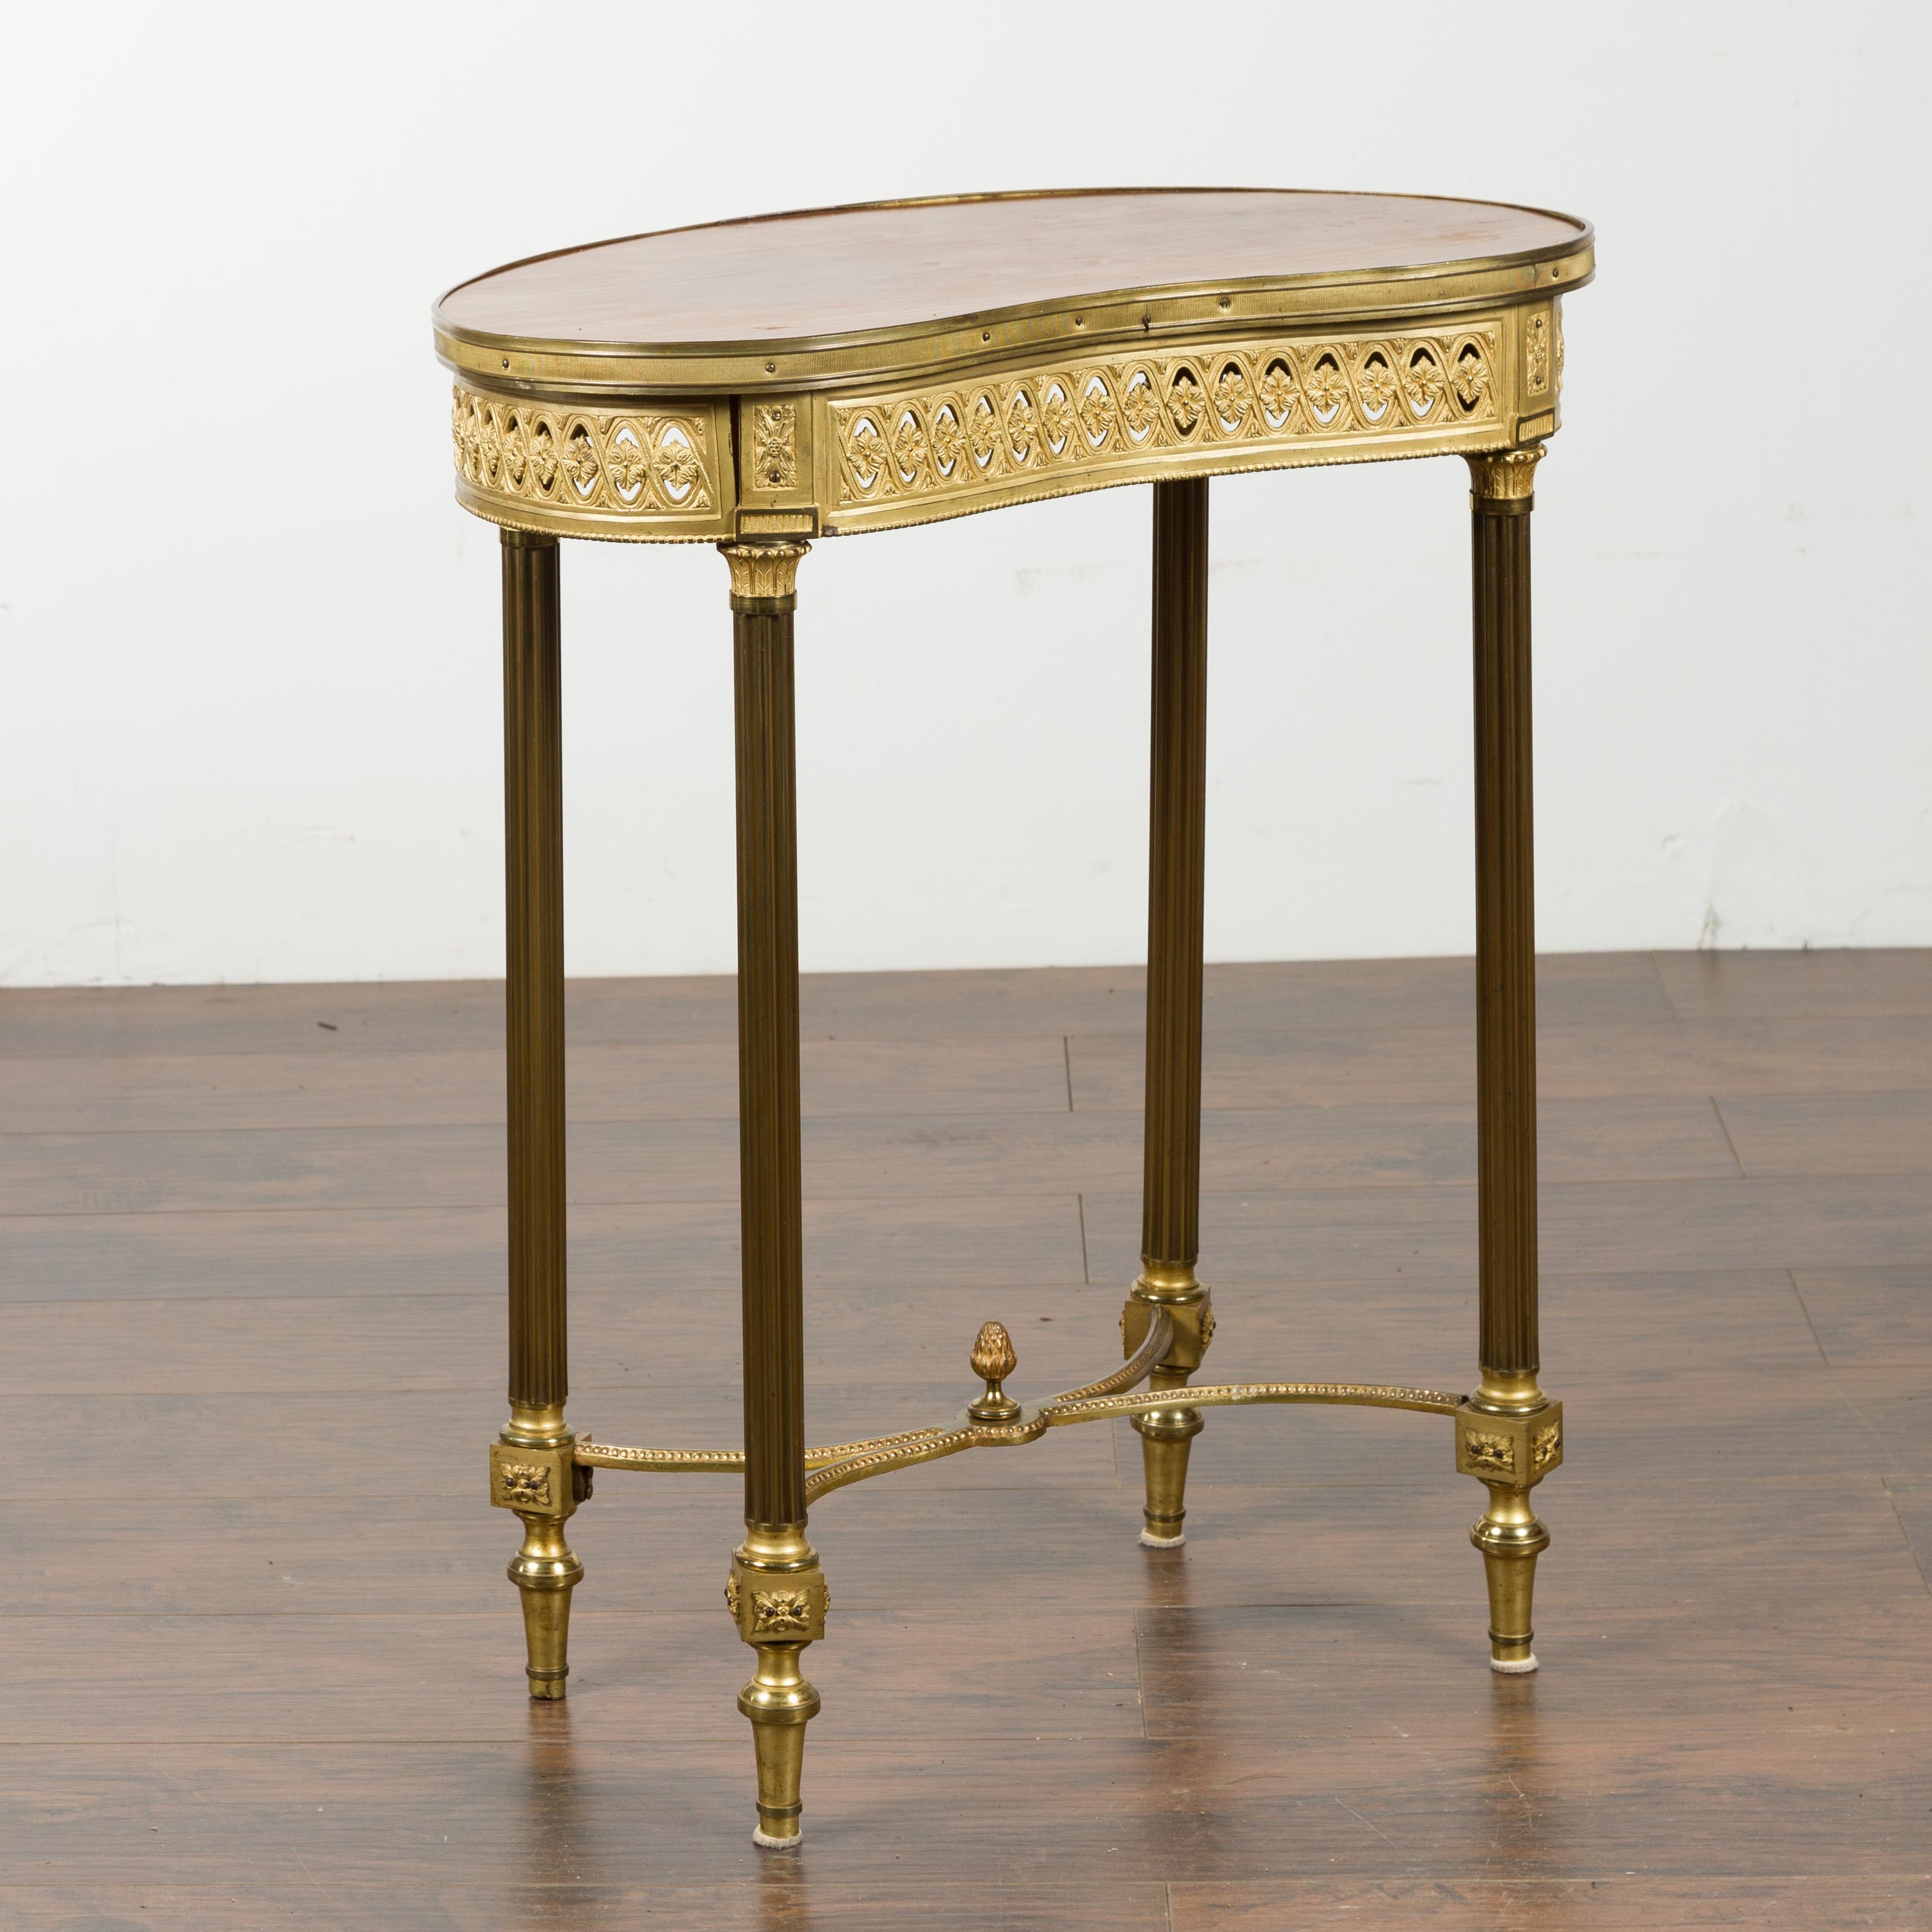 A French Louis XVI style kidney shaped gilt bronze accent table from the 19th century with fluted columns and rosettes. Created in France during the 19th century, this gilt bronze table features a kidney shaped wooden top with reeded rim, sitting